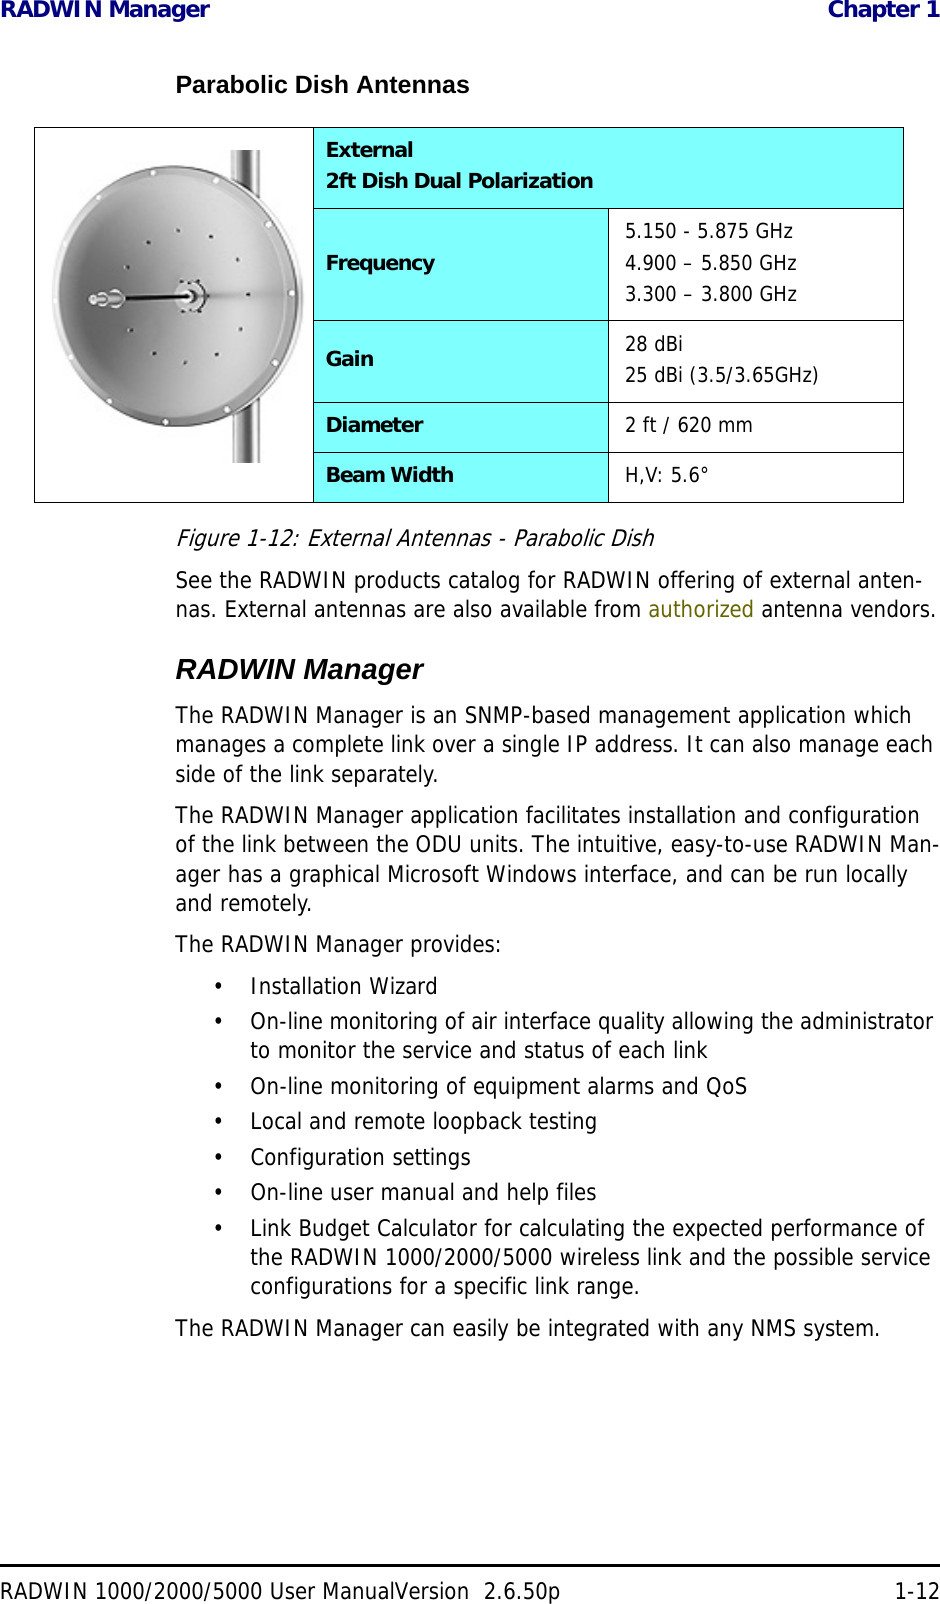 RADWIN Manager  Chapter 1RADWIN 1000/2000/5000 User ManualVersion  2.6.50p 1-12Parabolic Dish AntennasFigure 1-12: External Antennas - Parabolic DishSee the RADWIN products catalog for RADWIN offering of external anten-nas. External antennas are also available from authorized antenna vendors.RADWIN ManagerThe RADWIN Manager is an SNMP-based management application which manages a complete link over a single IP address. It can also manage each side of the link separately.The RADWIN Manager application facilitates installation and configuration of the link between the ODU units. The intuitive, easy-to-use RADWIN Man-ager has a graphical Microsoft Windows interface, and can be run locally and remotely. The RADWIN Manager provides:• Installation Wizard• On-line monitoring of air interface quality allowing the administrator to monitor the service and status of each link• On-line monitoring of equipment alarms and QoS• Local and remote loopback testing• Configuration settings• On-line user manual and help files• Link Budget Calculator for calculating the expected performance of the RADWIN 1000/2000/5000 wireless link and the possible service configurations for a specific link range.The RADWIN Manager can easily be integrated with any NMS system.External2ft Dish Dual PolarizationFrequency 5.150 - 5.875 GHz4.900 – 5.850 GHz3.300 – 3.800 GHzGain 28 dBi25 dBi (3.5/3.65GHz)Diameter 2 ft / 620 mmBeam Width H,V: 5.6°